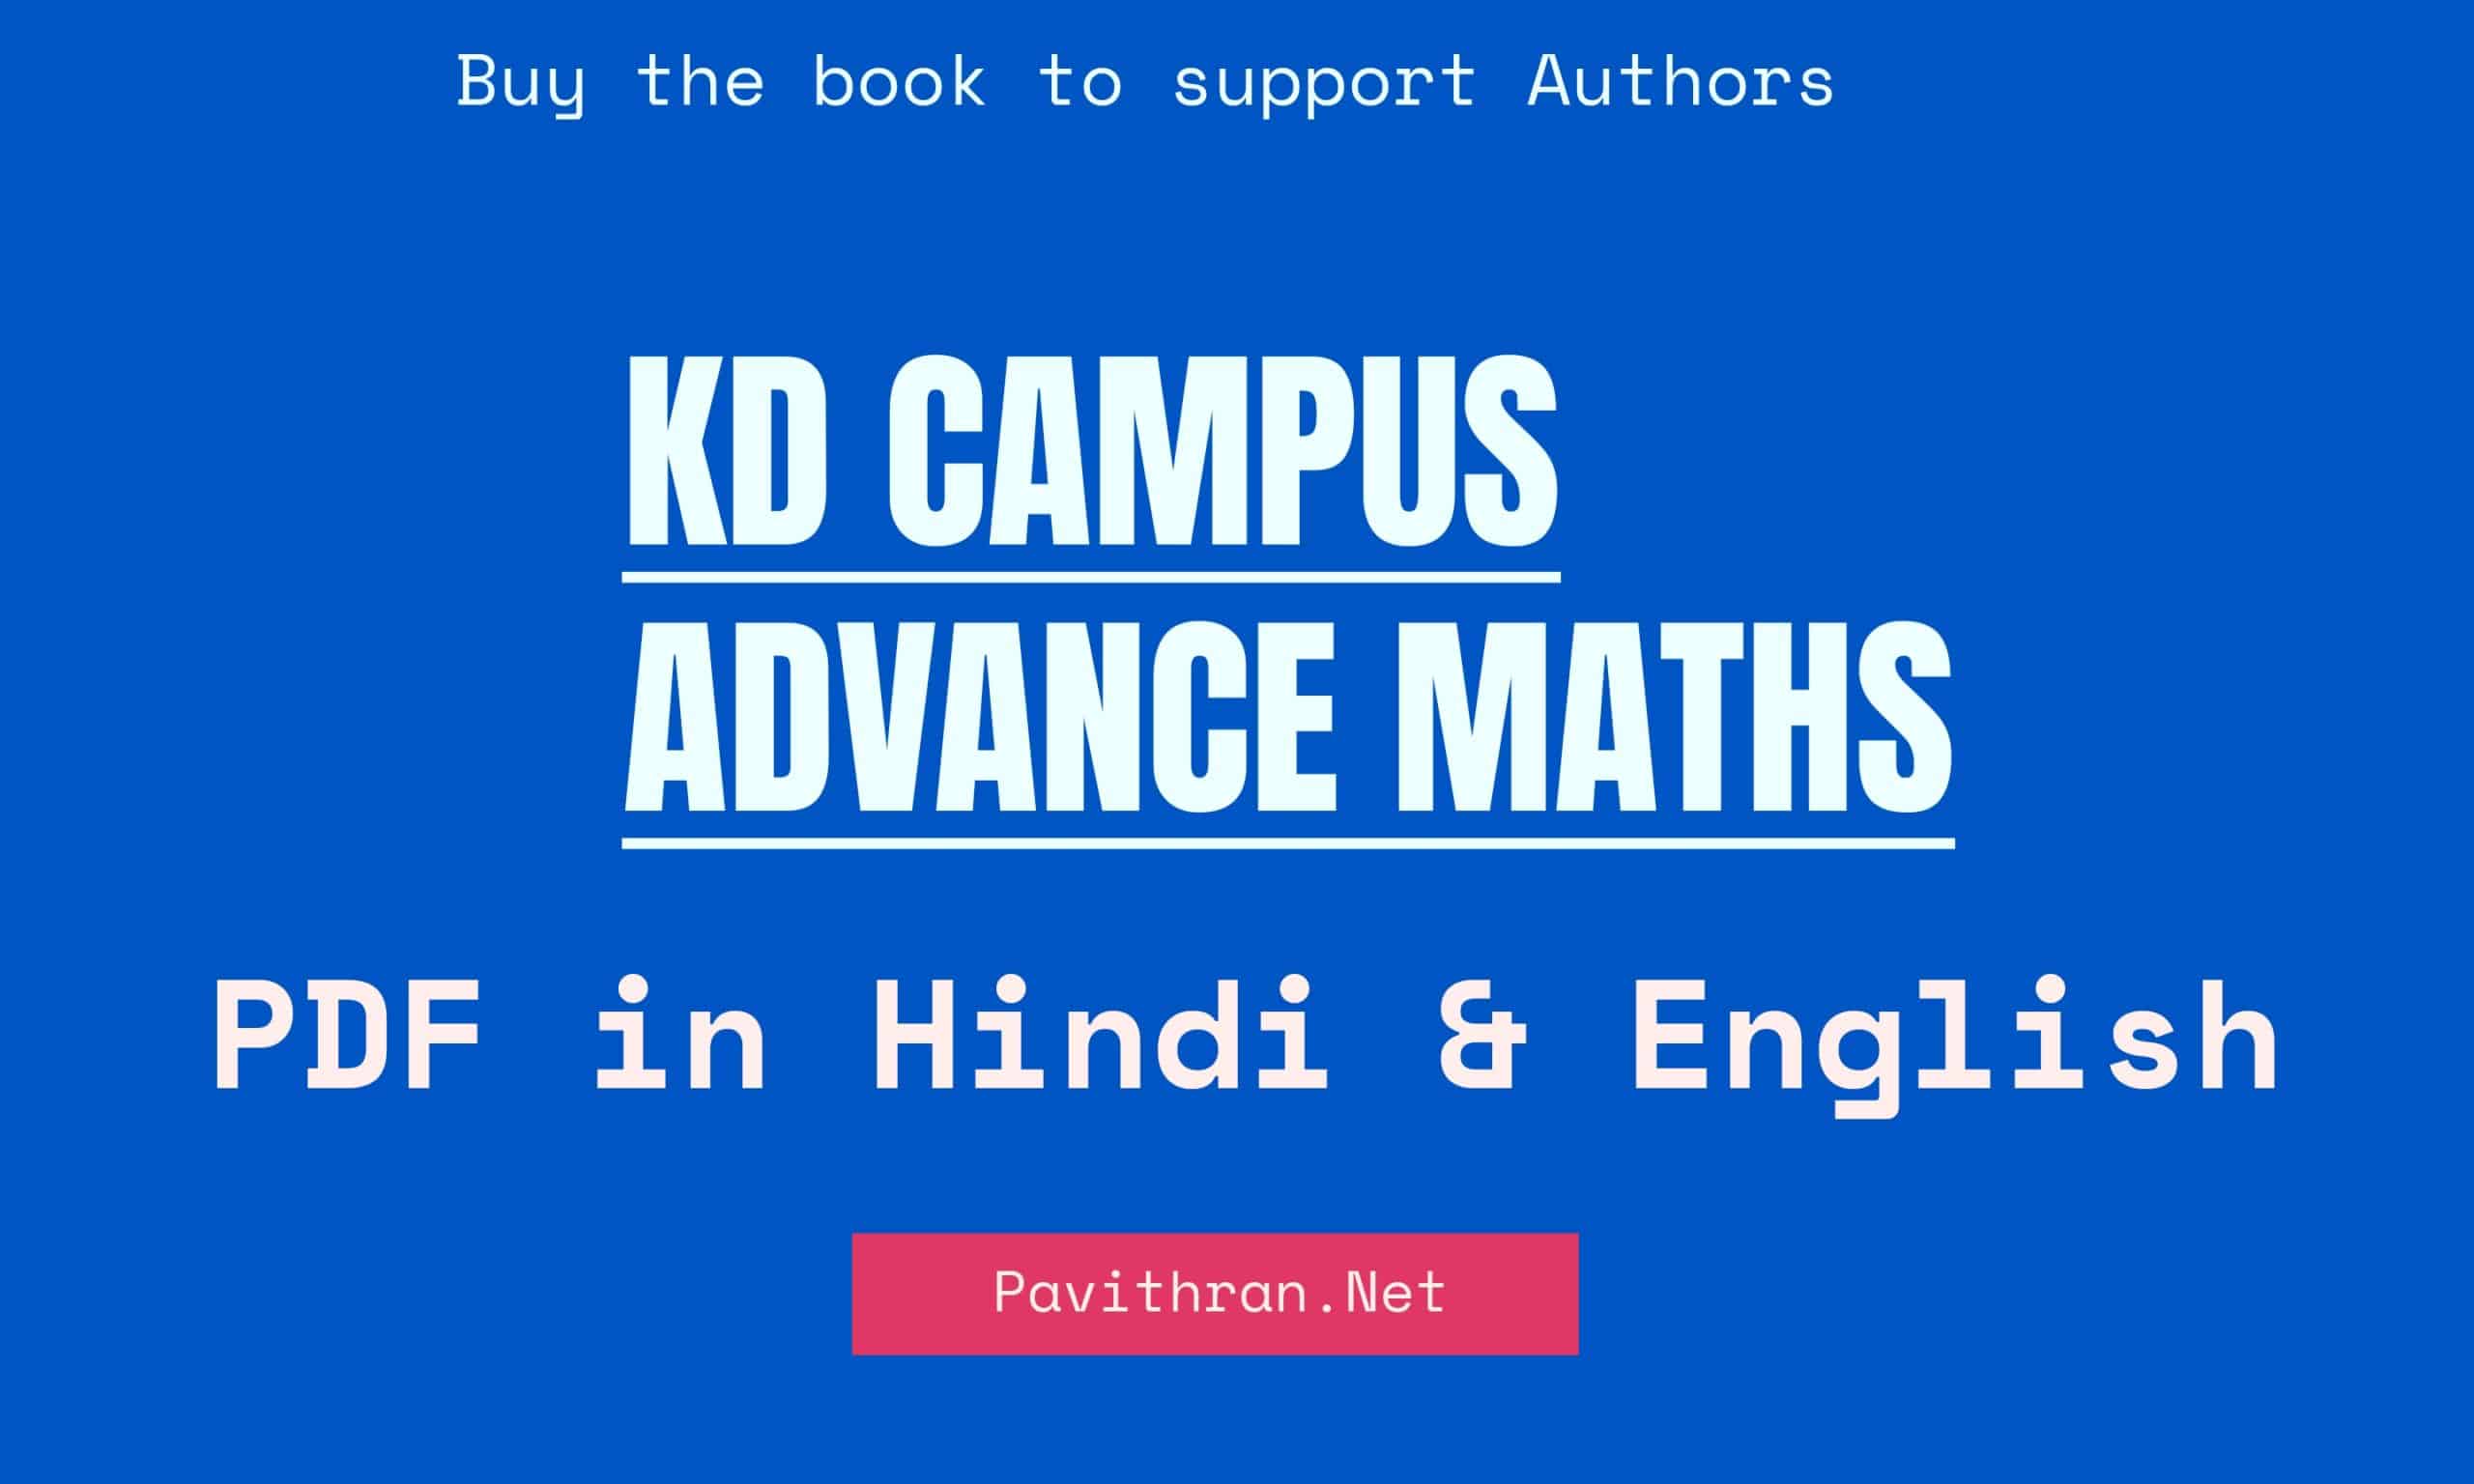 KD Campus Advance Maths PDF in Hindi and in English